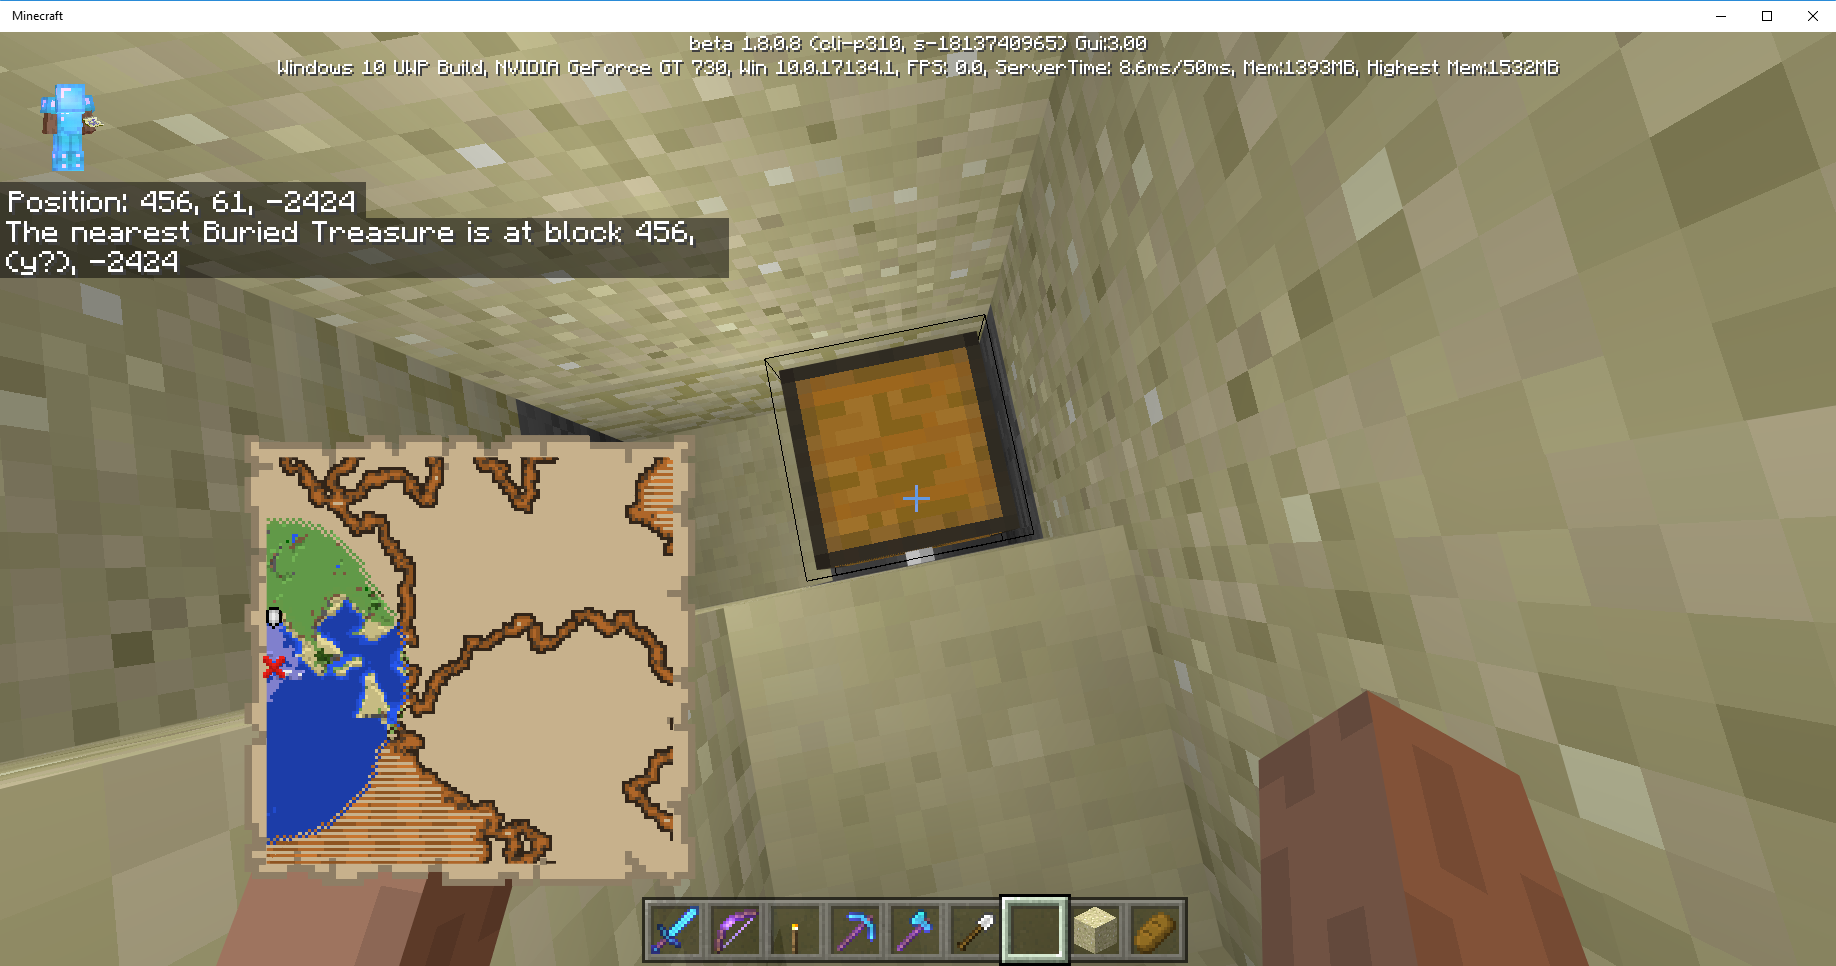 How to Find Treasure in Minecraft?